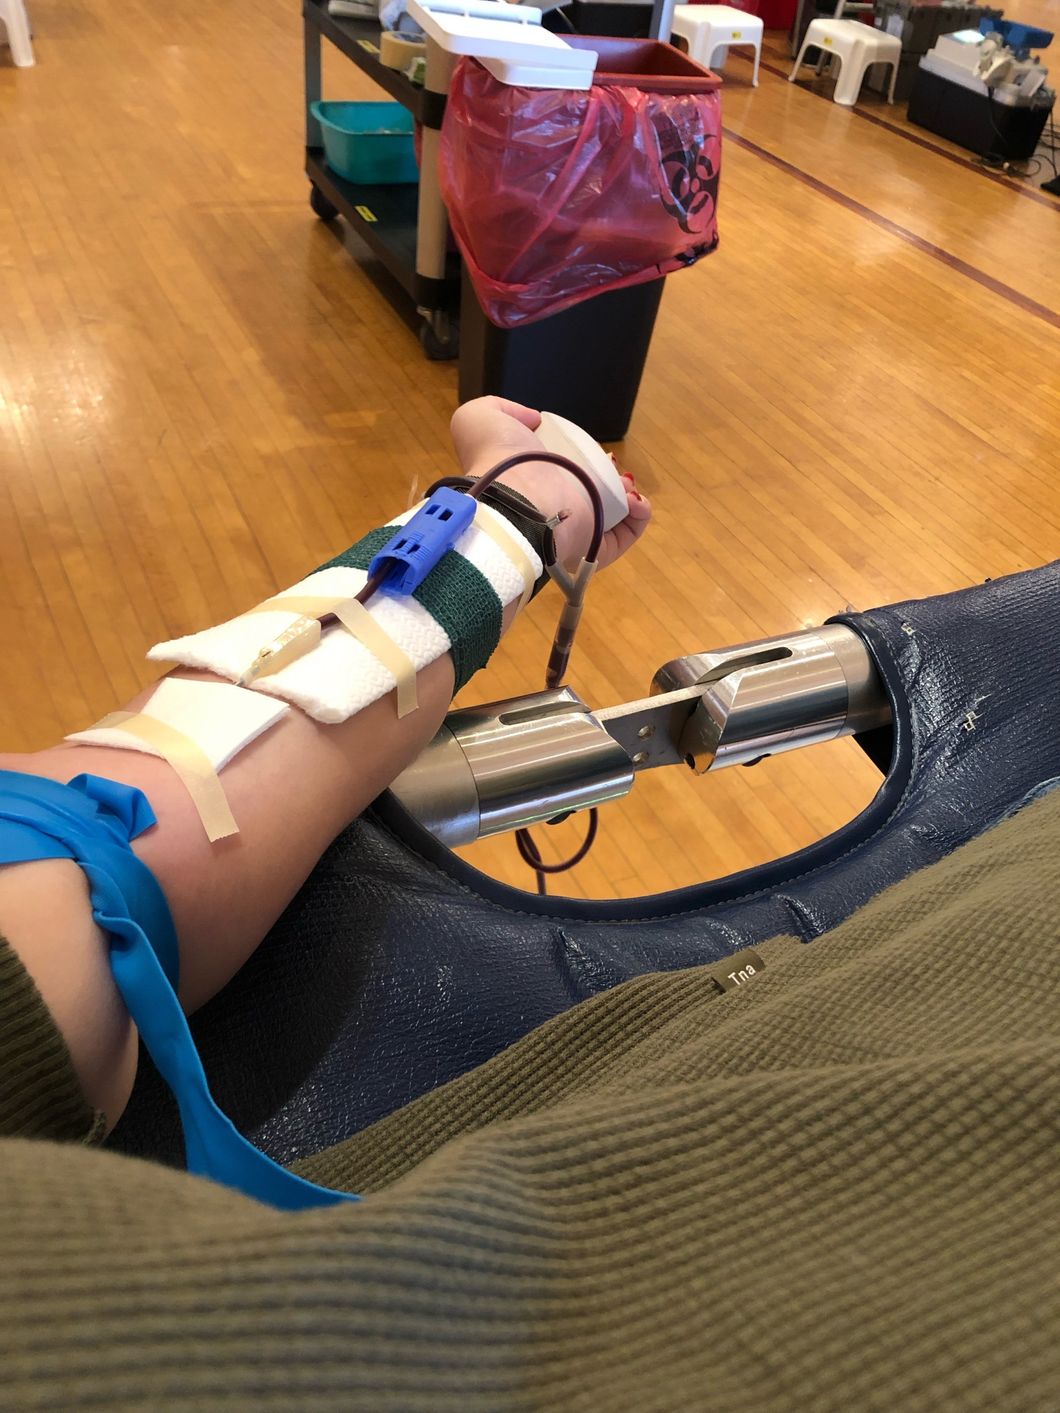 Giving Blood Made Me Pass Out, But Keeping Other People Alive Makes It So Worthwhile